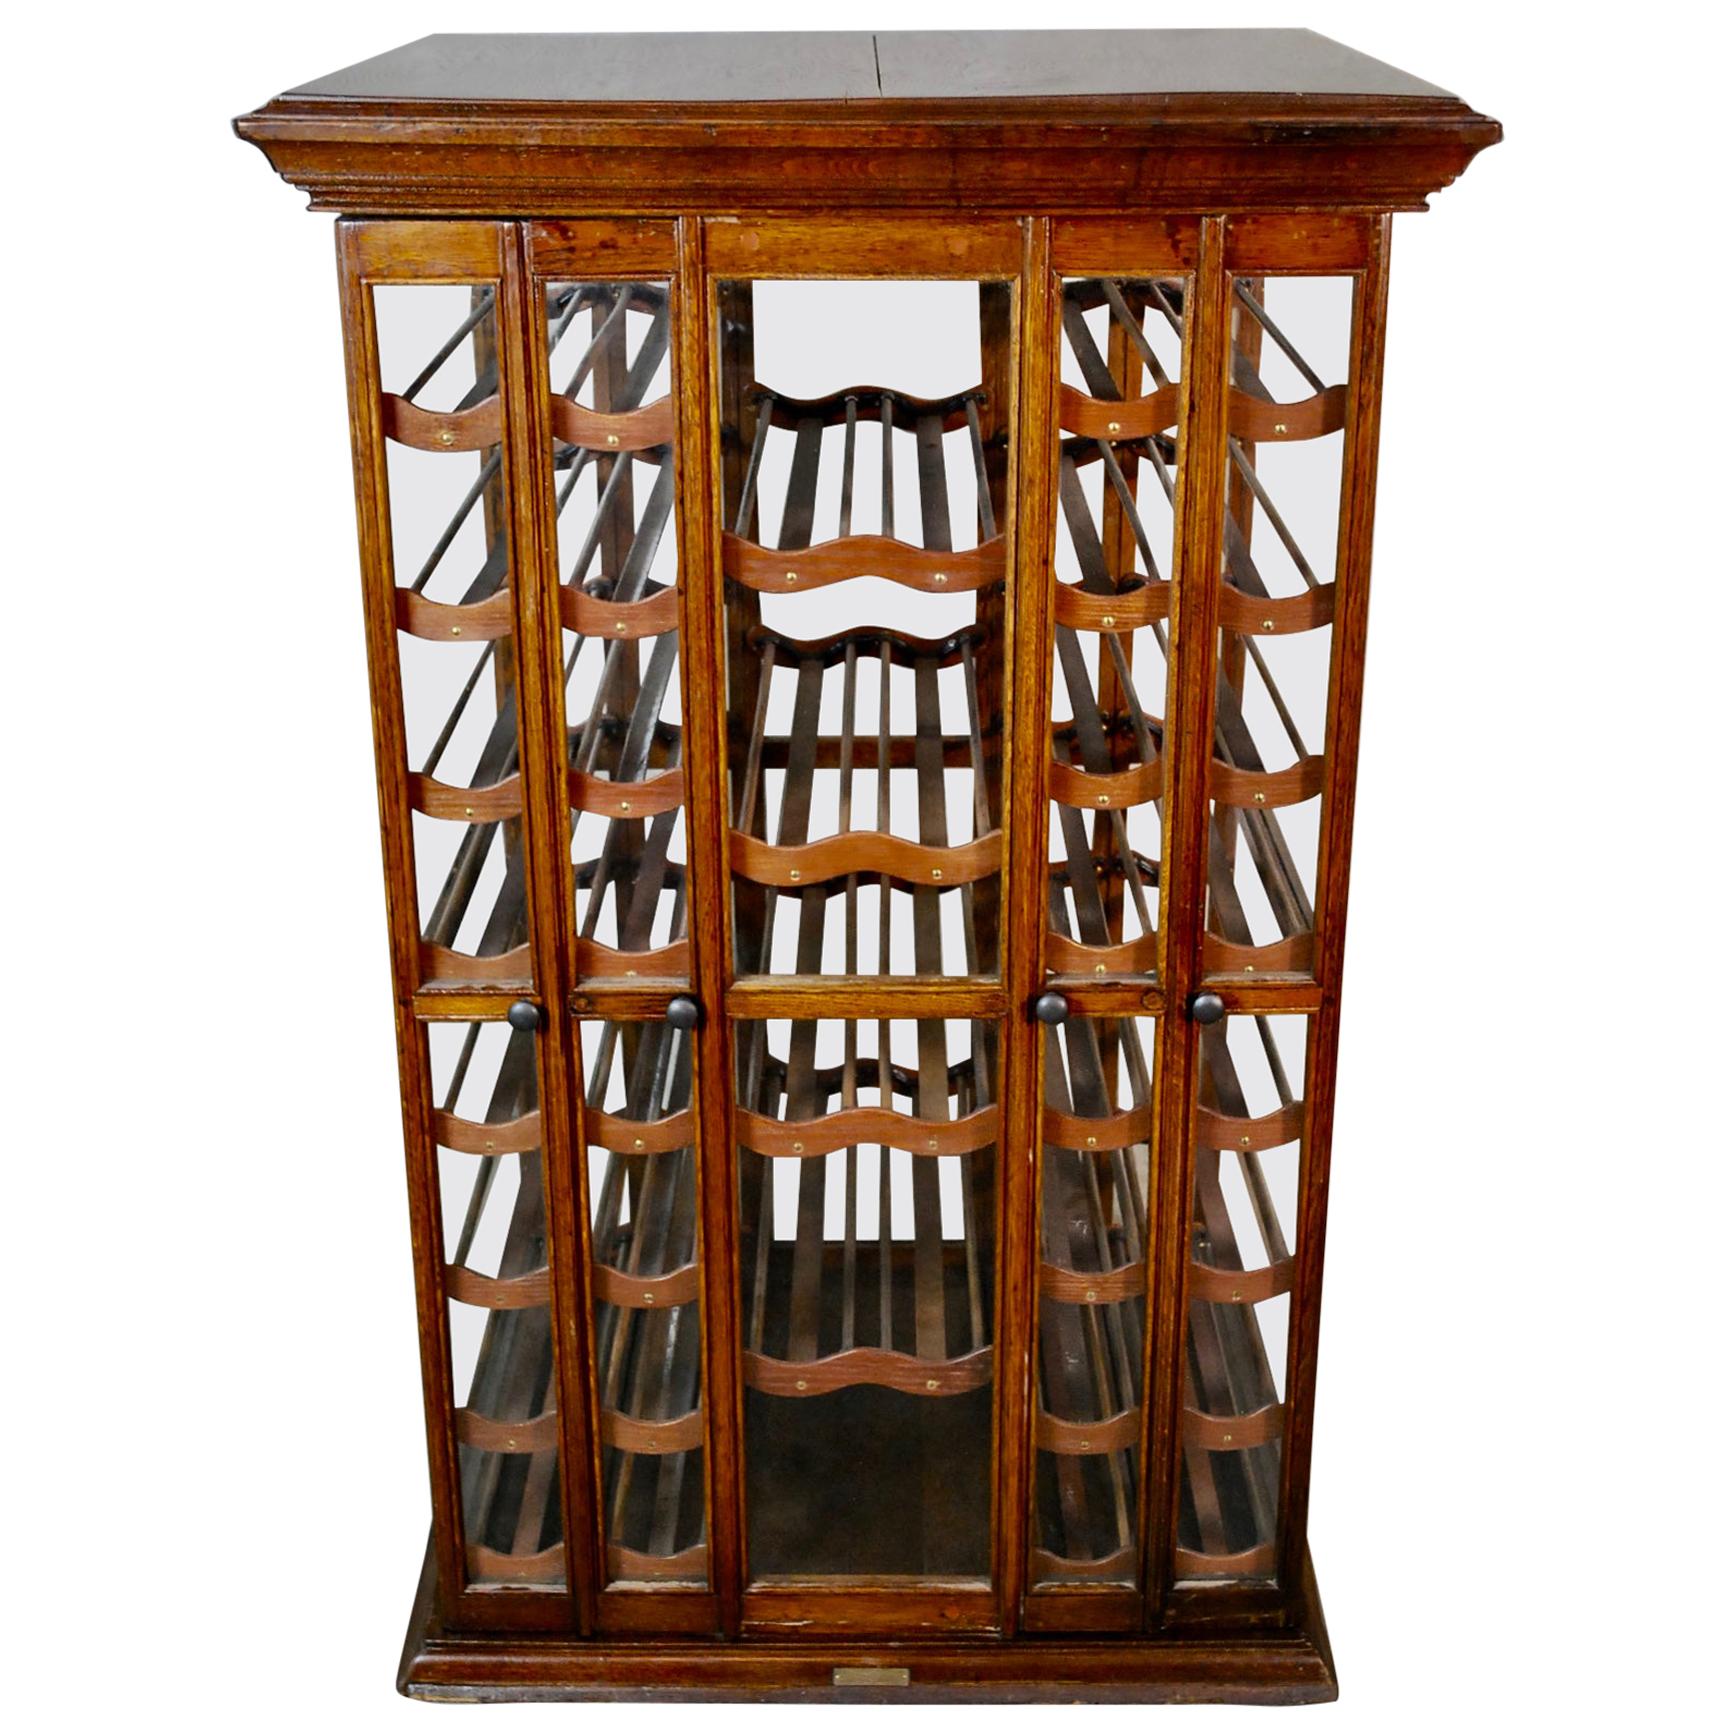 Late 19th Century Showcase Spool Wine Cabinet by The Exhibition Showcase Co.